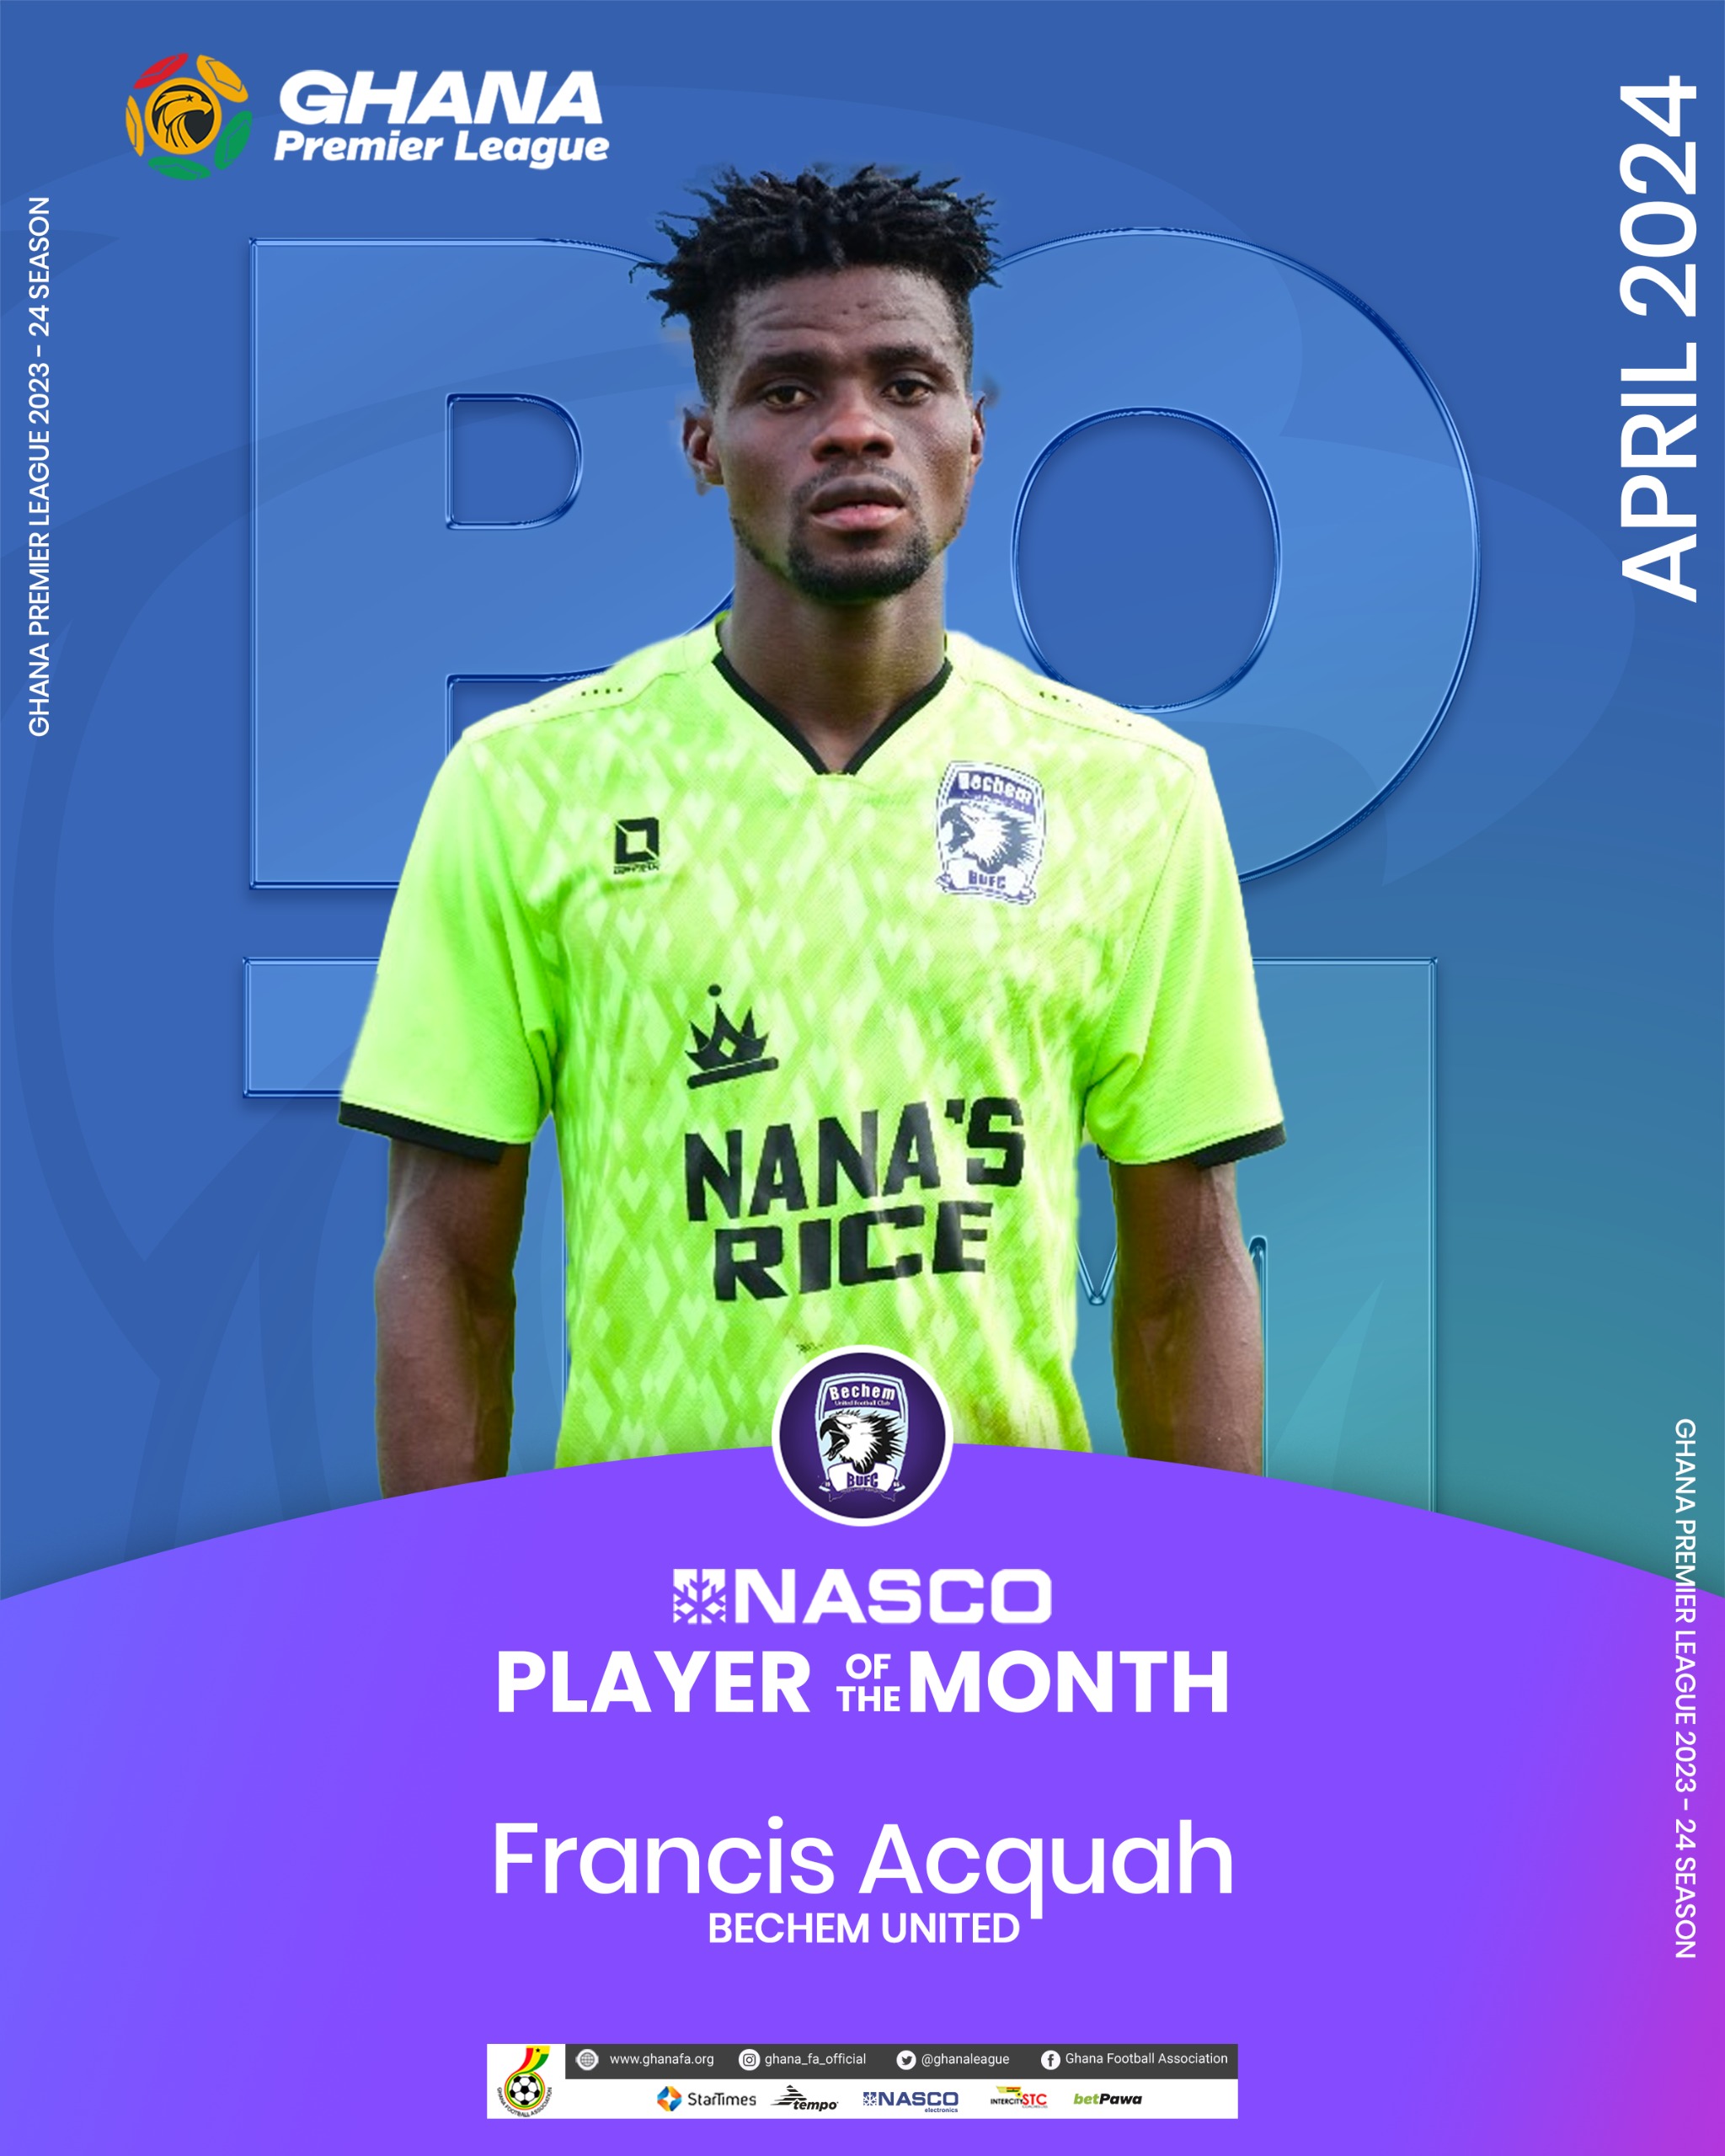 Francis Acquah crowned NASCO Player of the Month for April